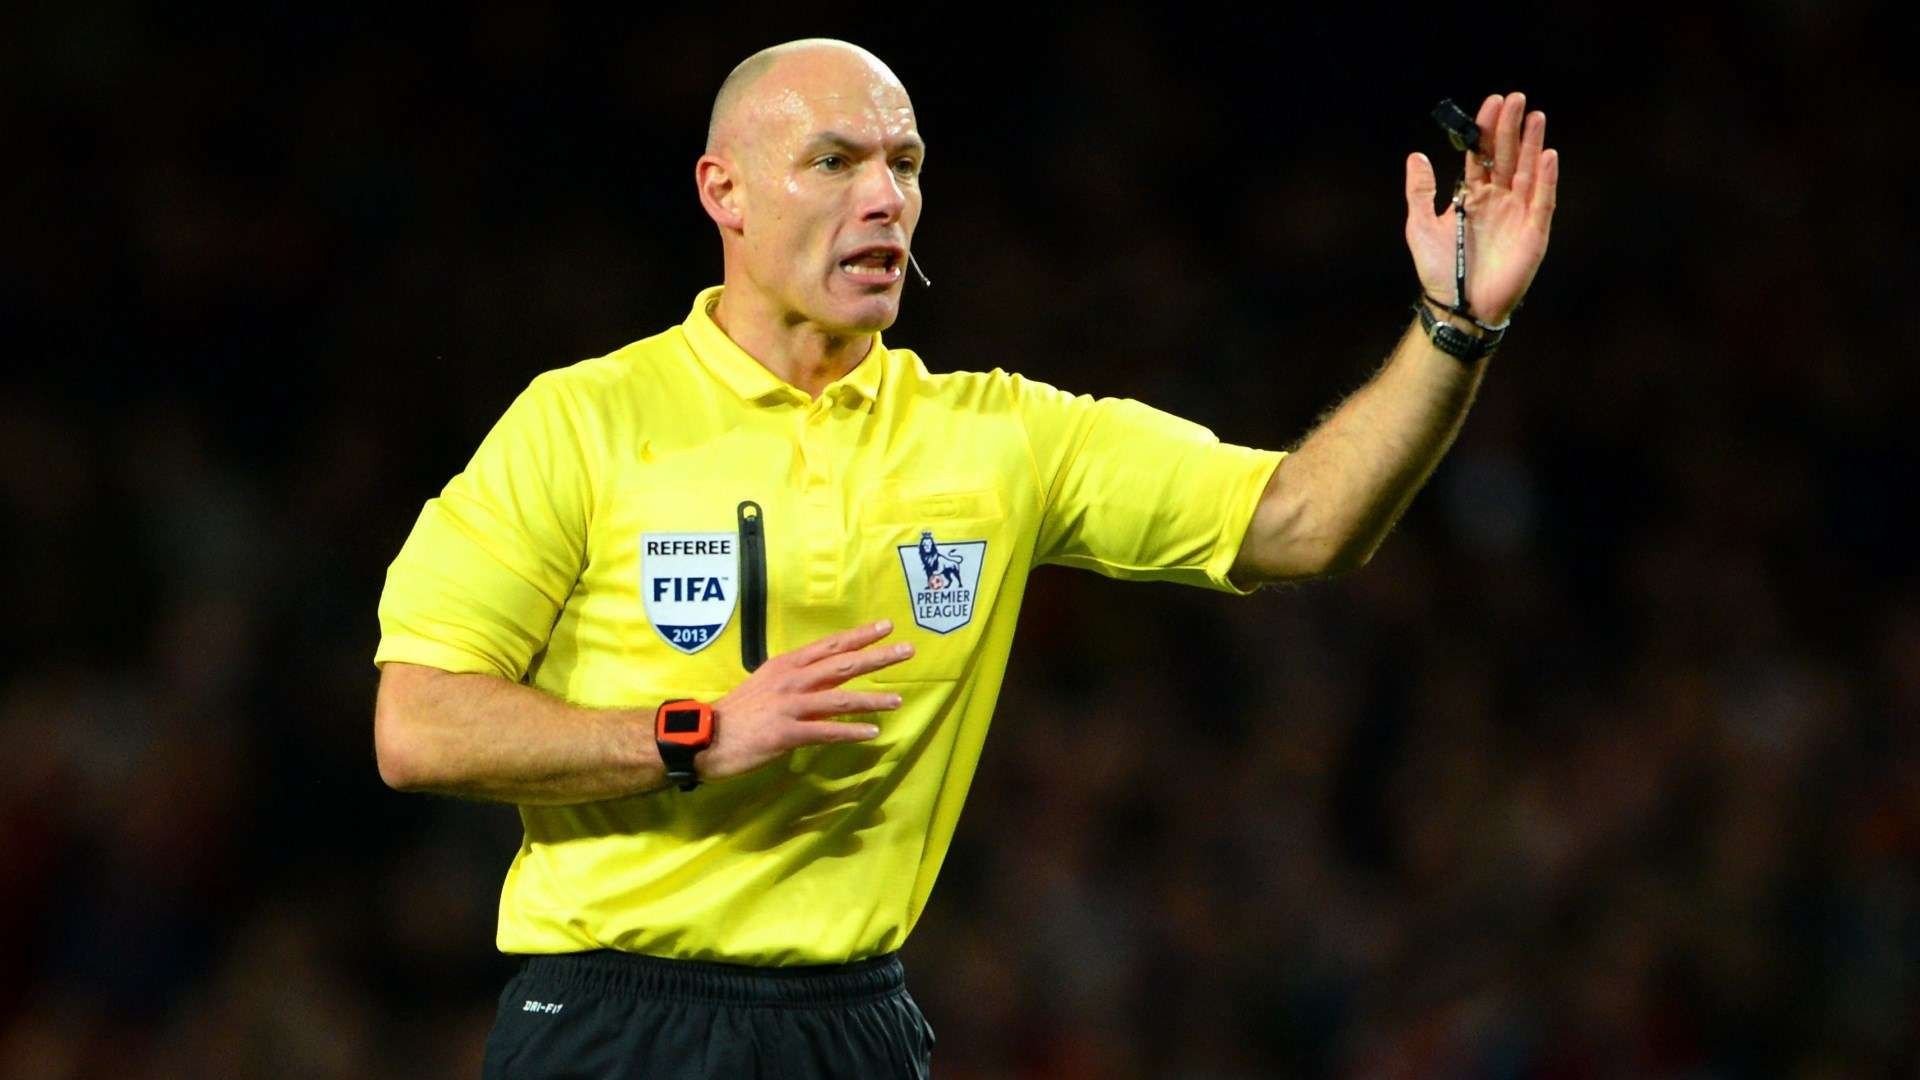 Collina, Webb And Rizzoli Top the List of Top-10 Best Football Referees in History